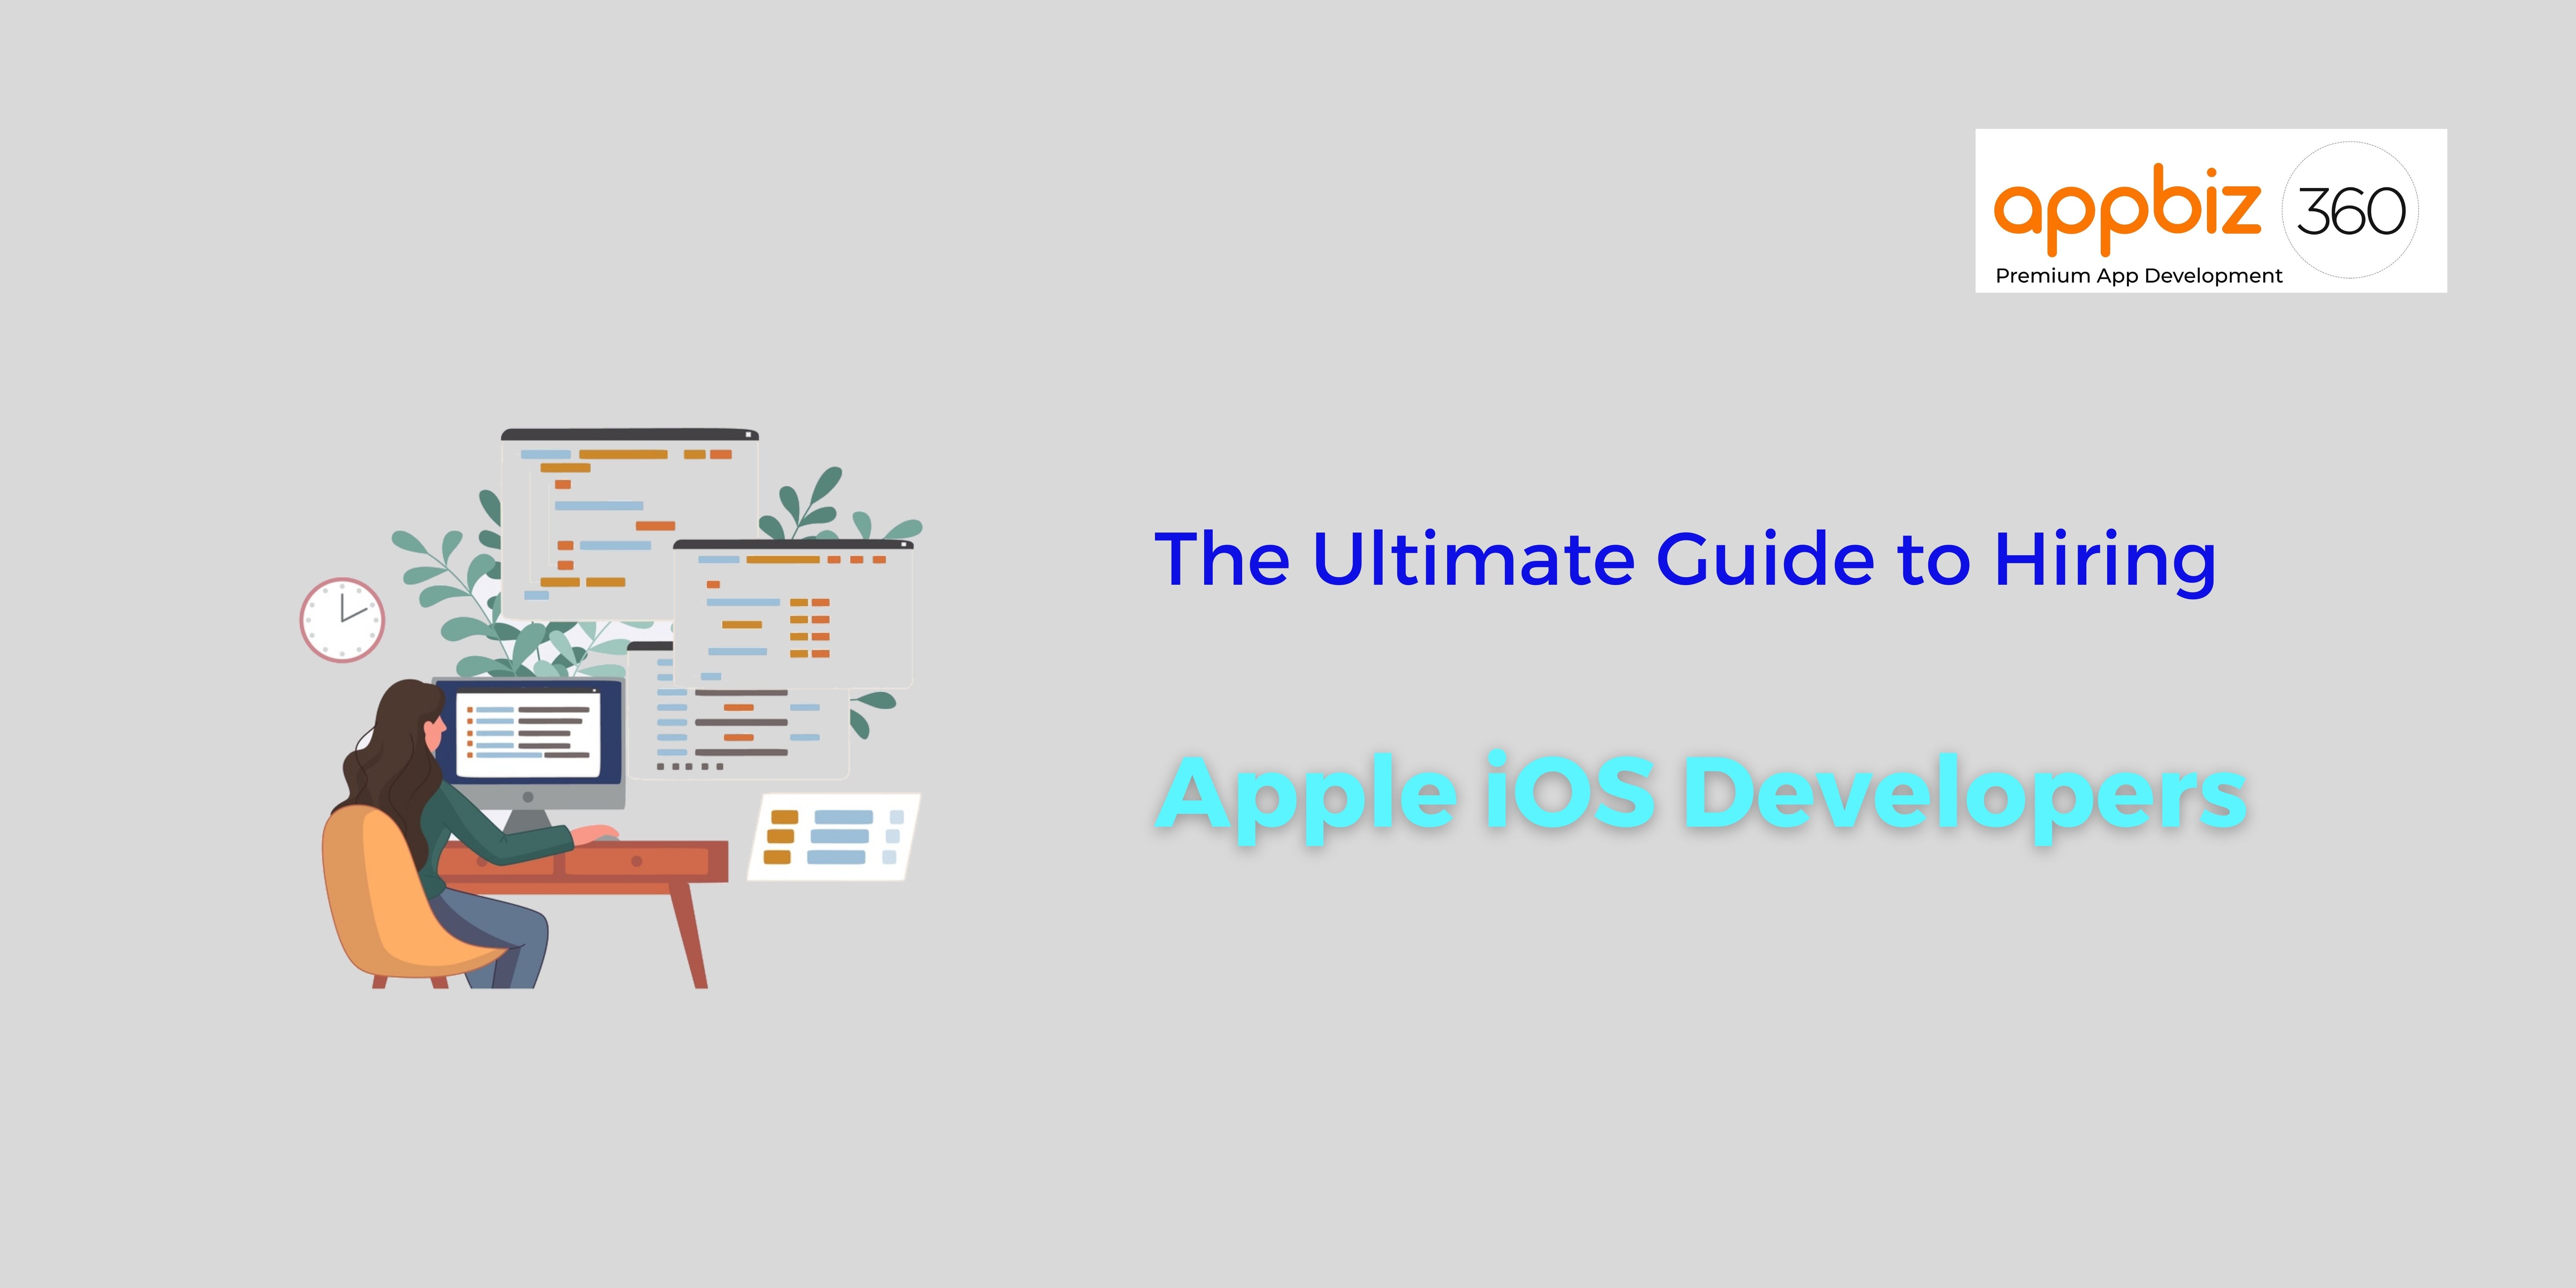 The Ultimate Guide to Hiring Apple iOS Developers